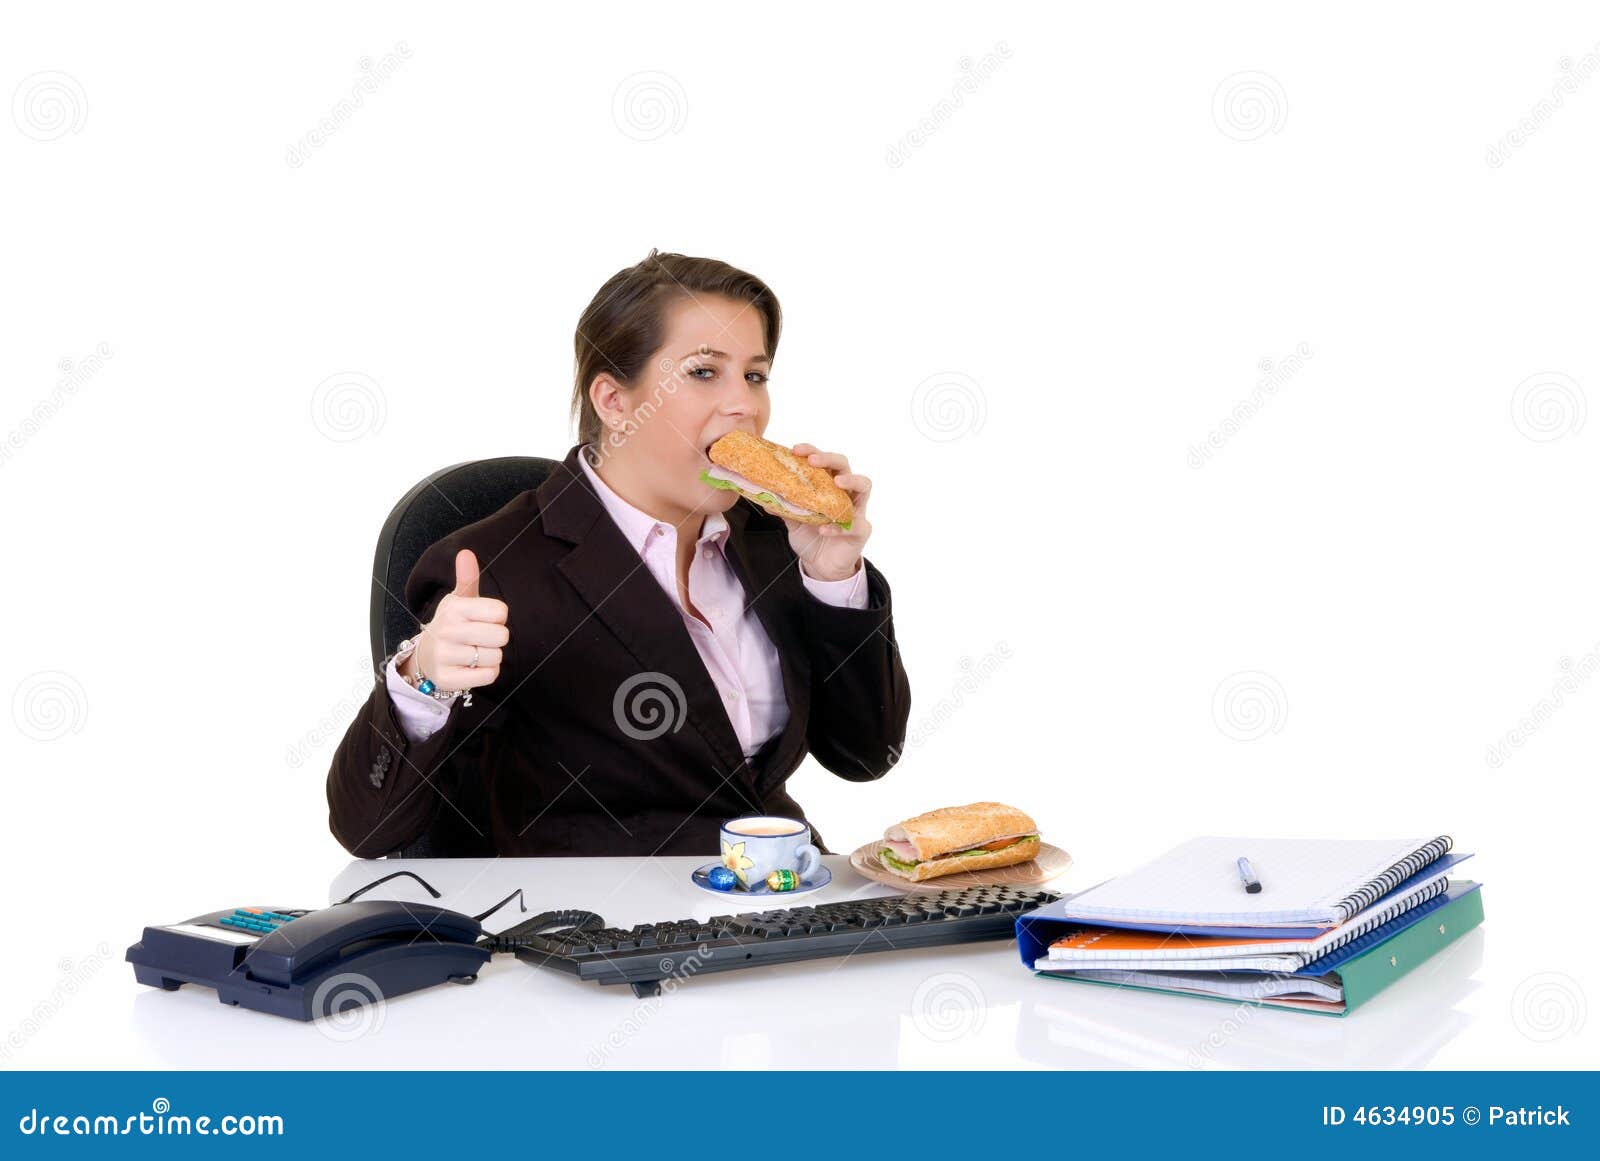 Young Secretary Lunch Break Stock Image Image Of Reception Lettuce